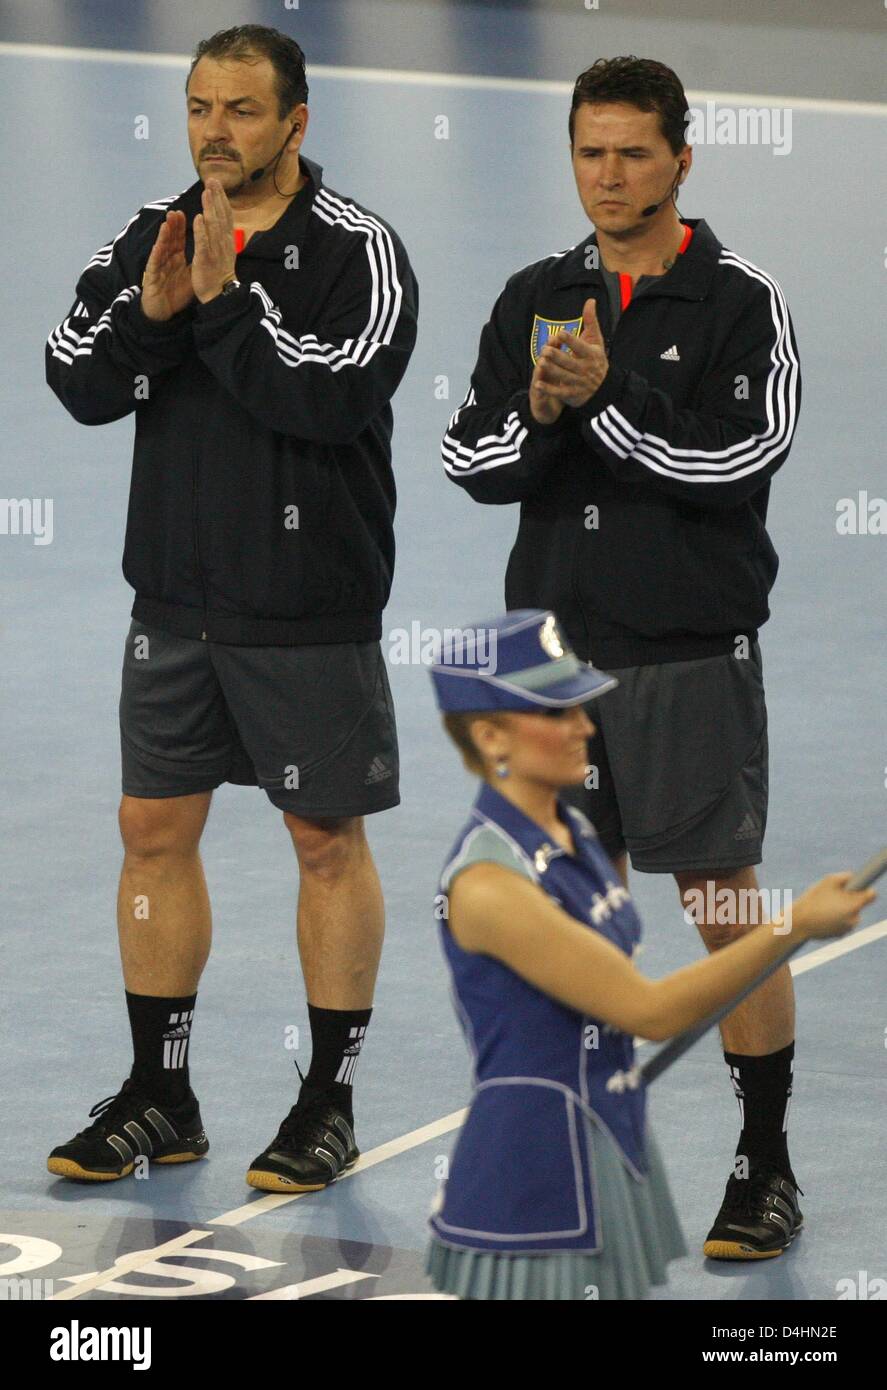 German referees Frank Lemme (R) and Bernd Ulrich applaud prior to the Handball World Championships semifinal Croatia vs Poland in Zagreb, Croatia, 30 January 2009. Croatia defeated Poland 29-23 and moves on to the final. Photo: Jens Wolf Stock Photo